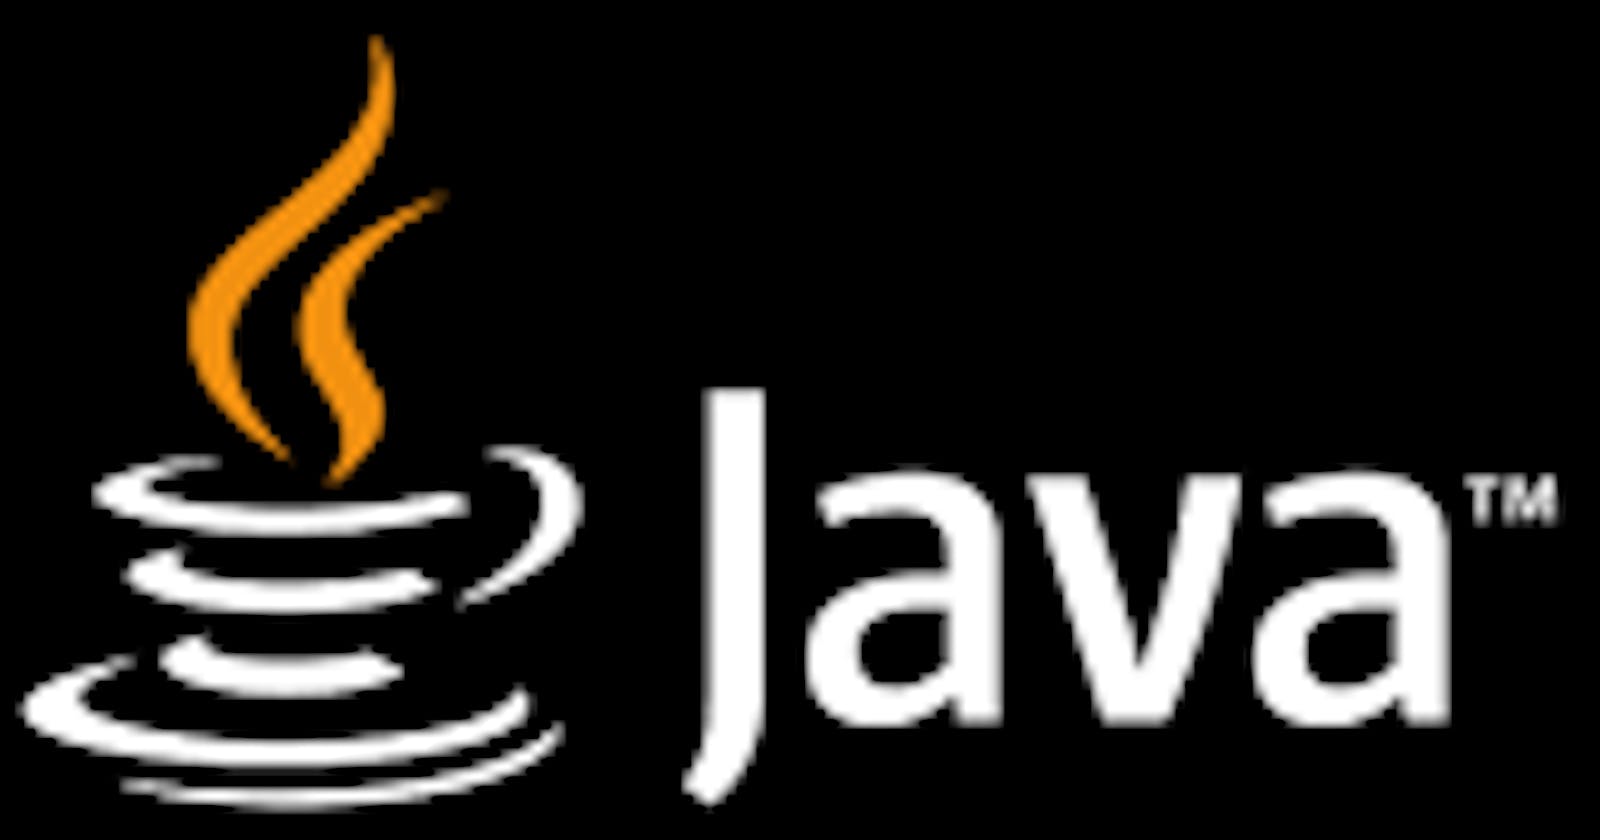 Input/Output in Java